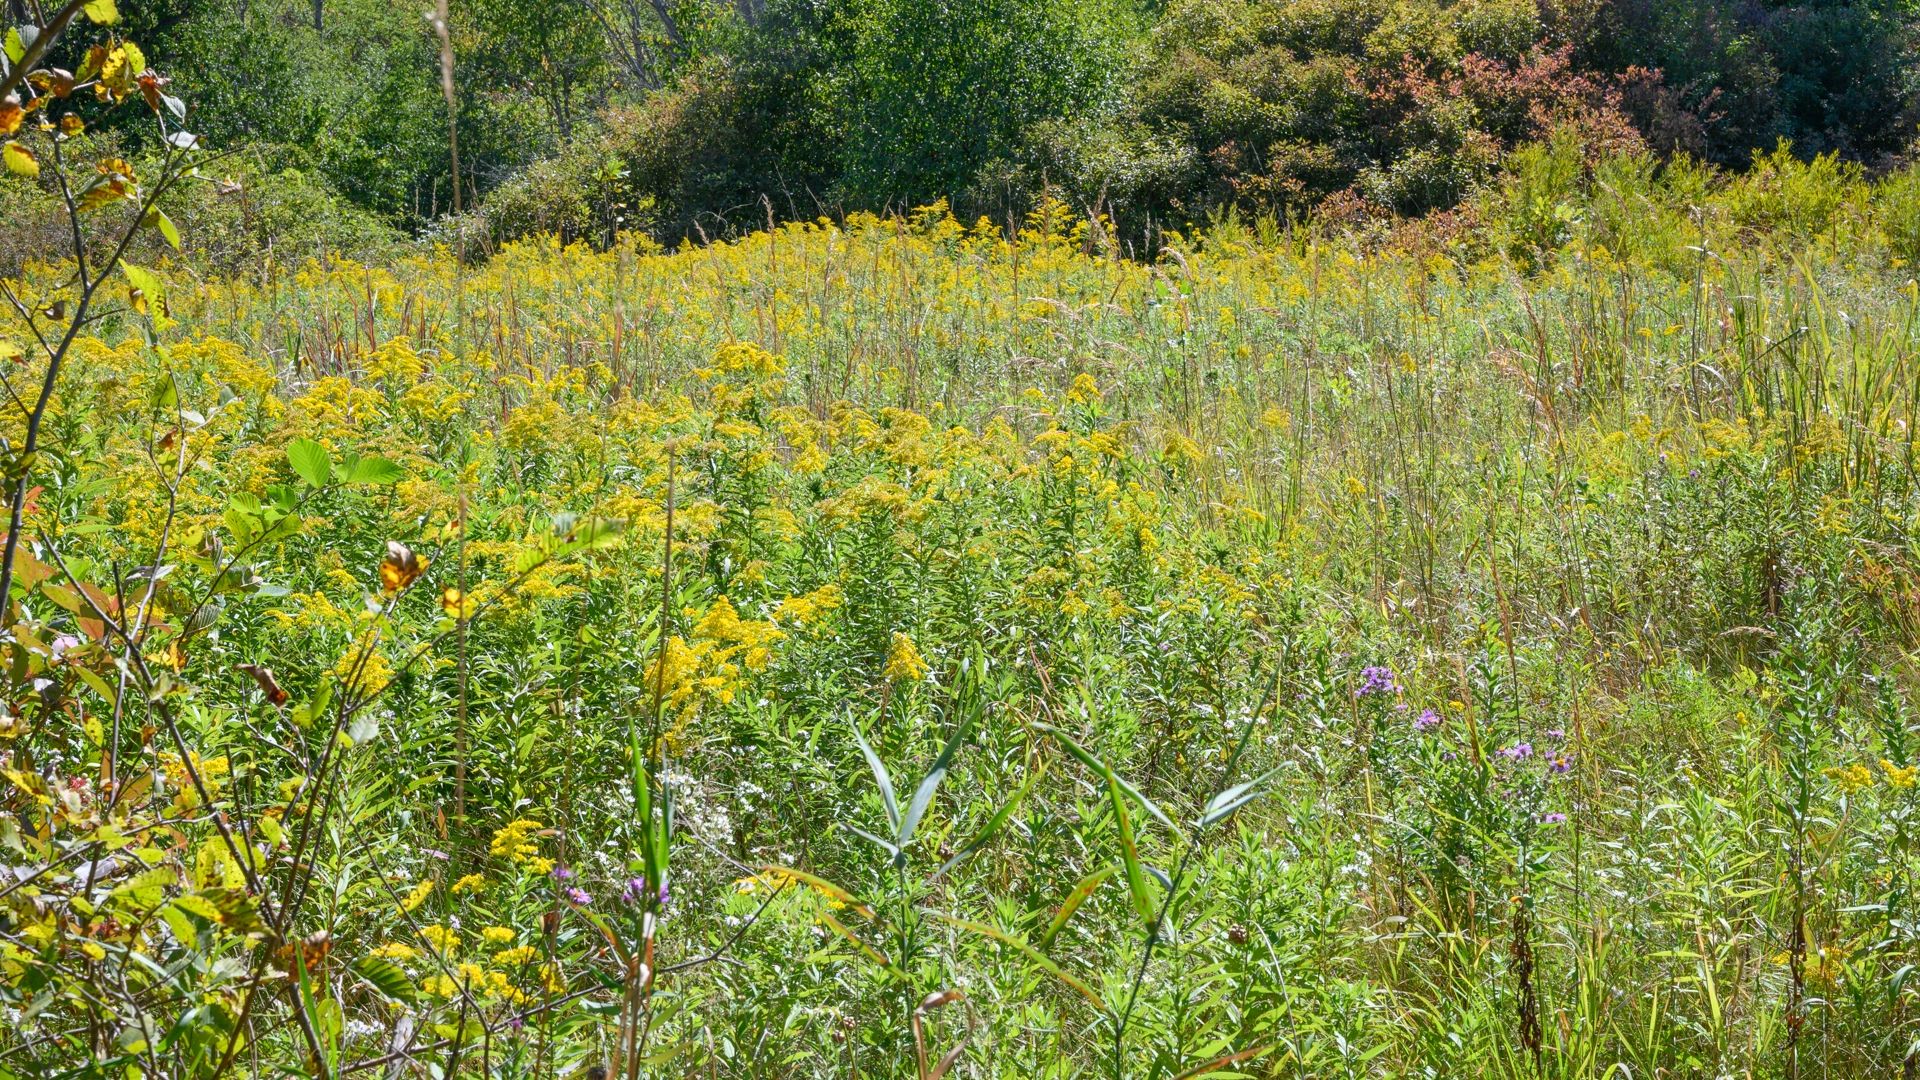 Natural brush with Pollinators located on the trail